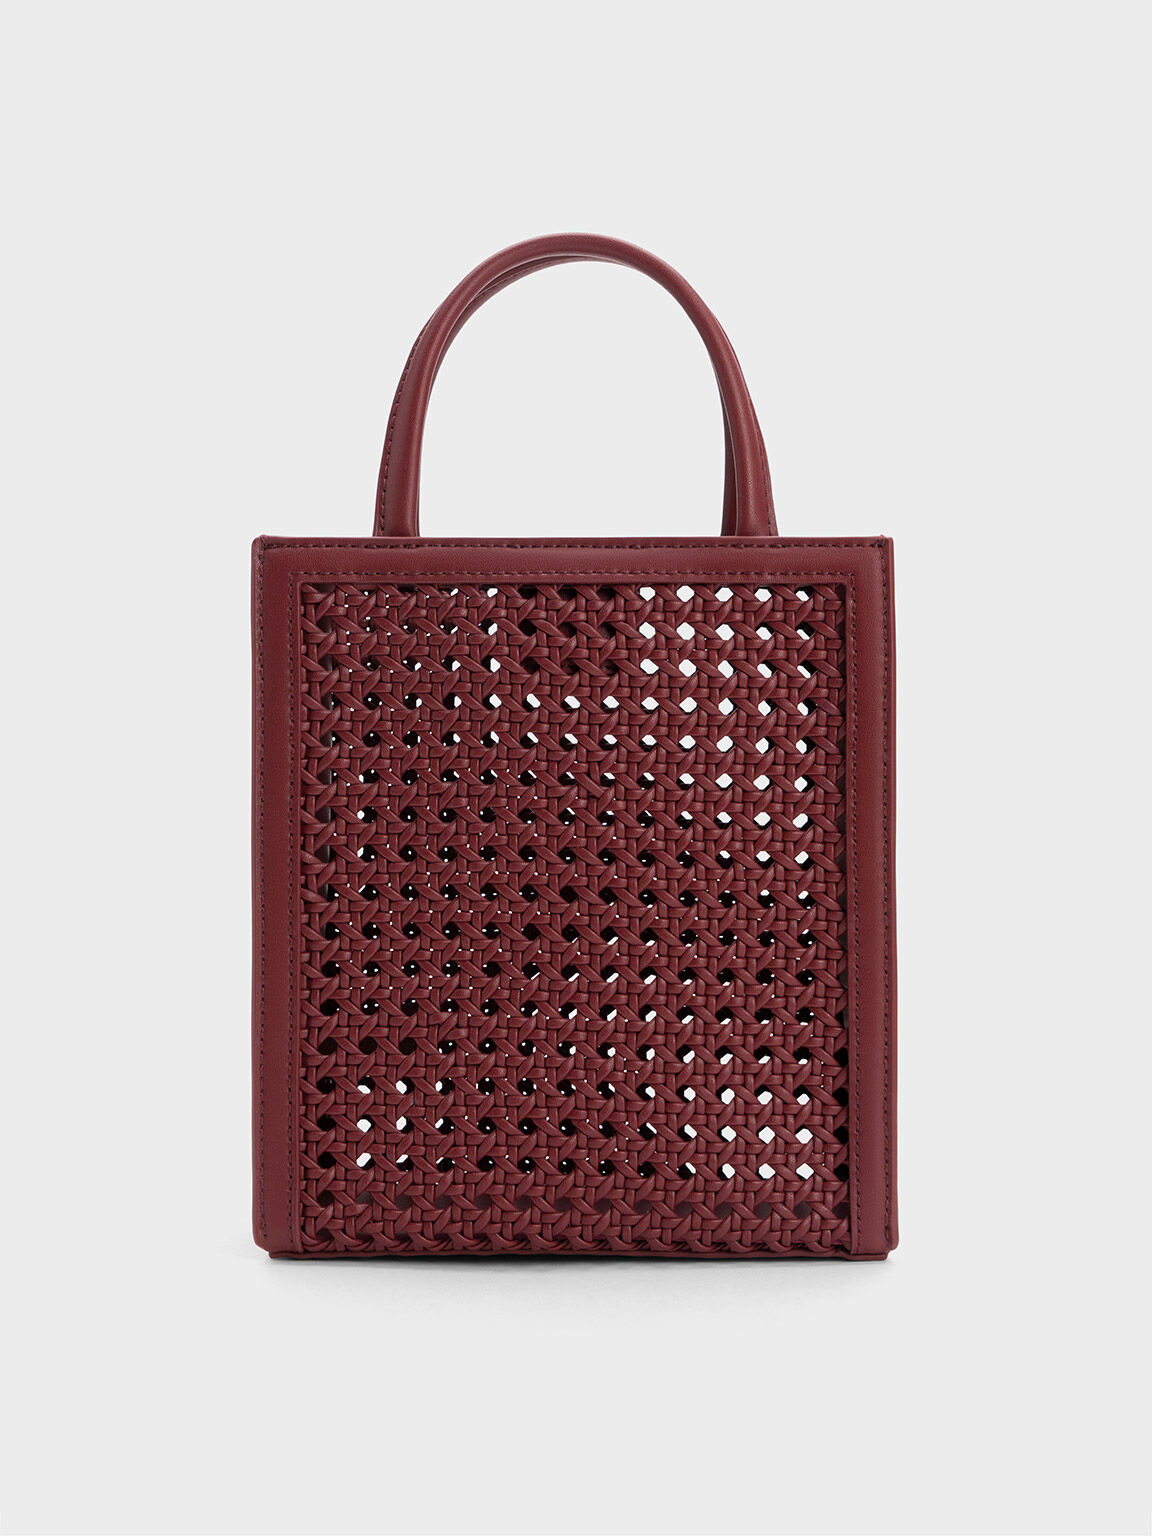 DOUBLE HANDLES LEATHER TOTE BAG